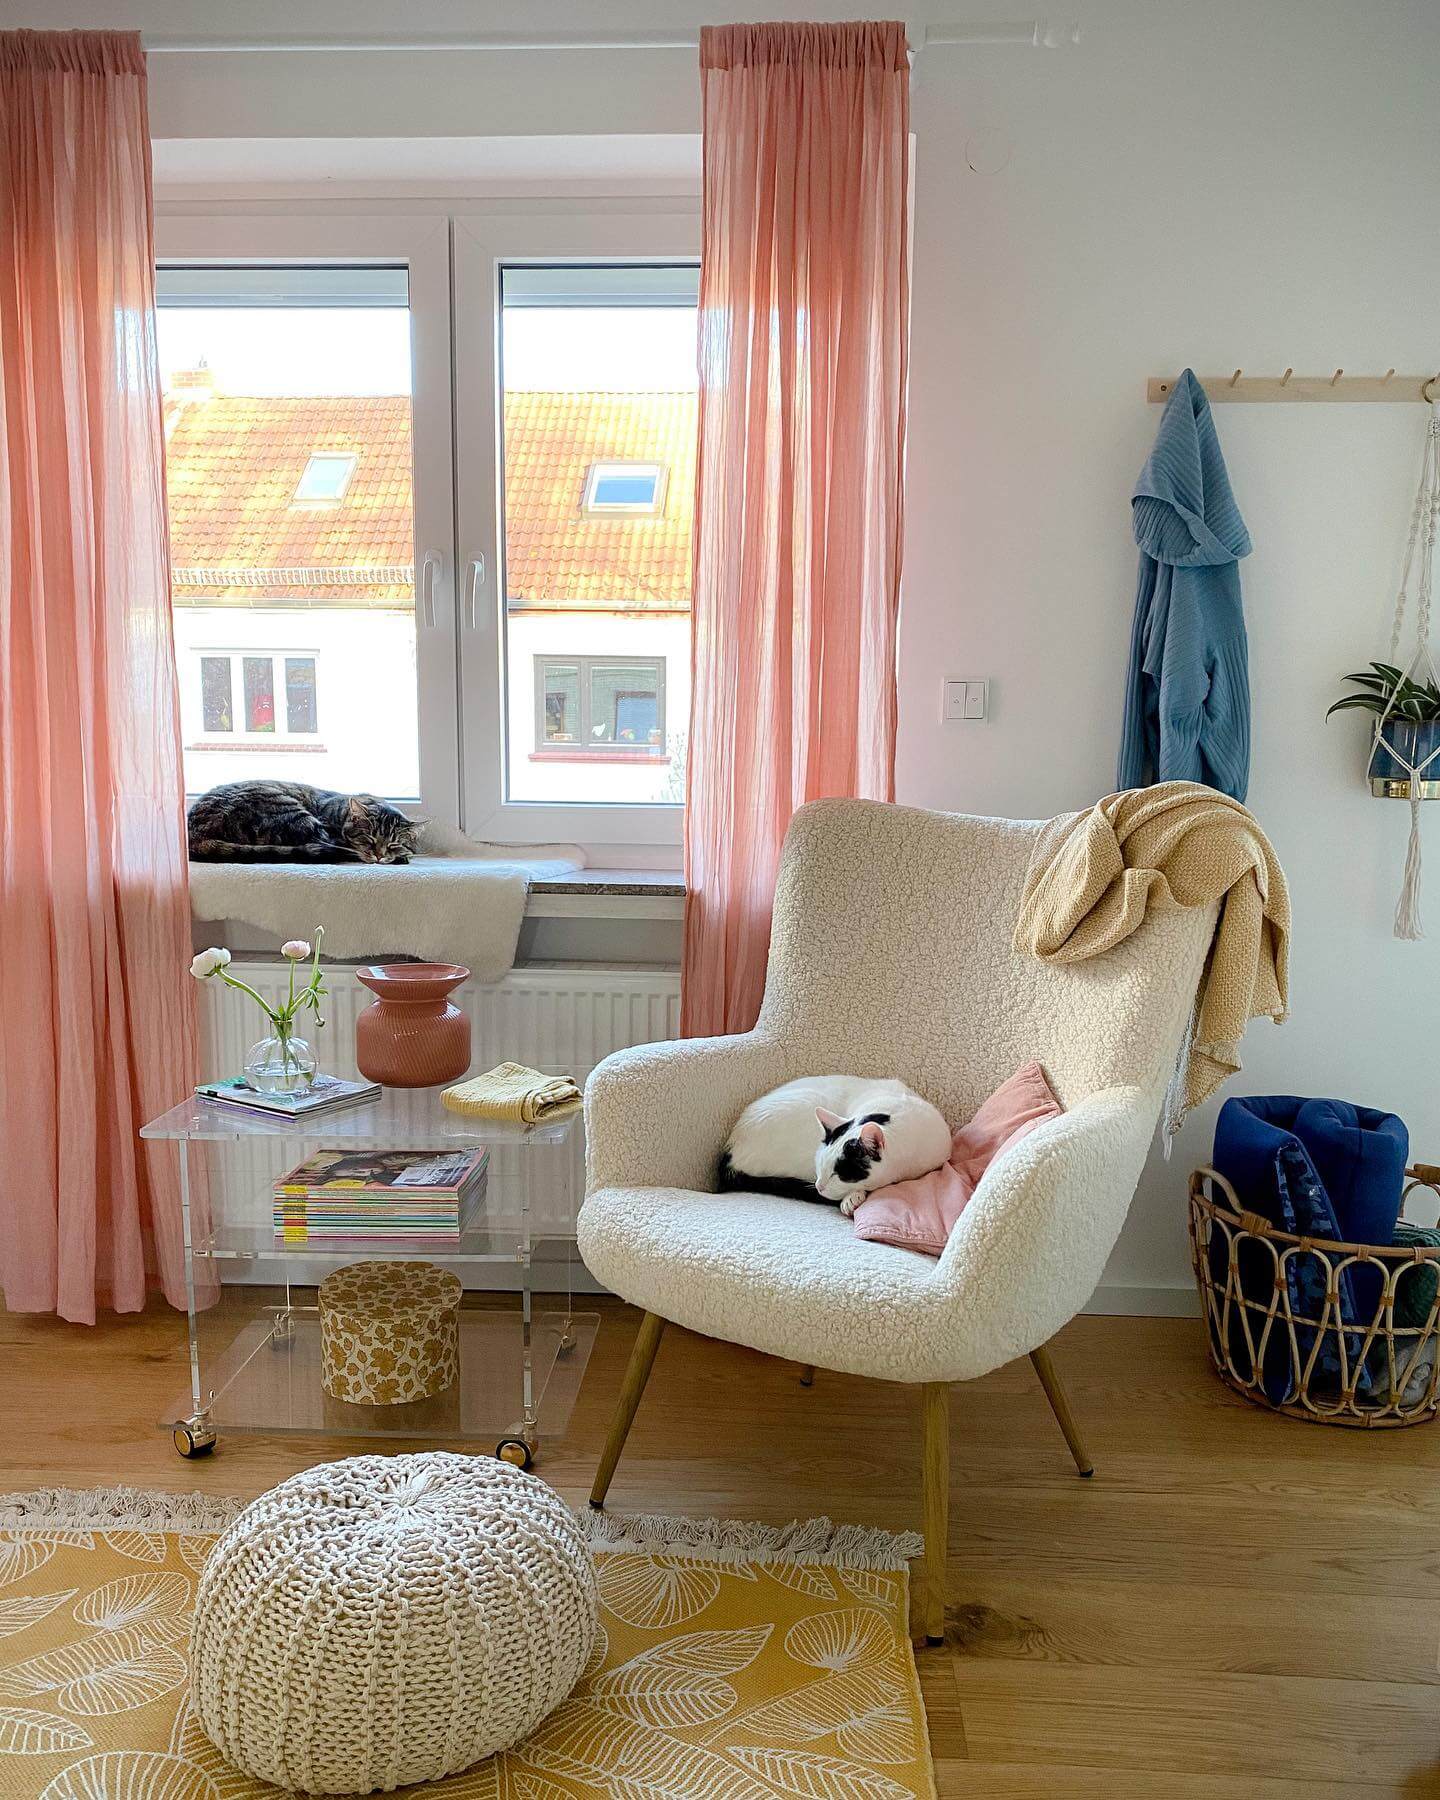 casa fabelhaft - colorful home with sleeping cats